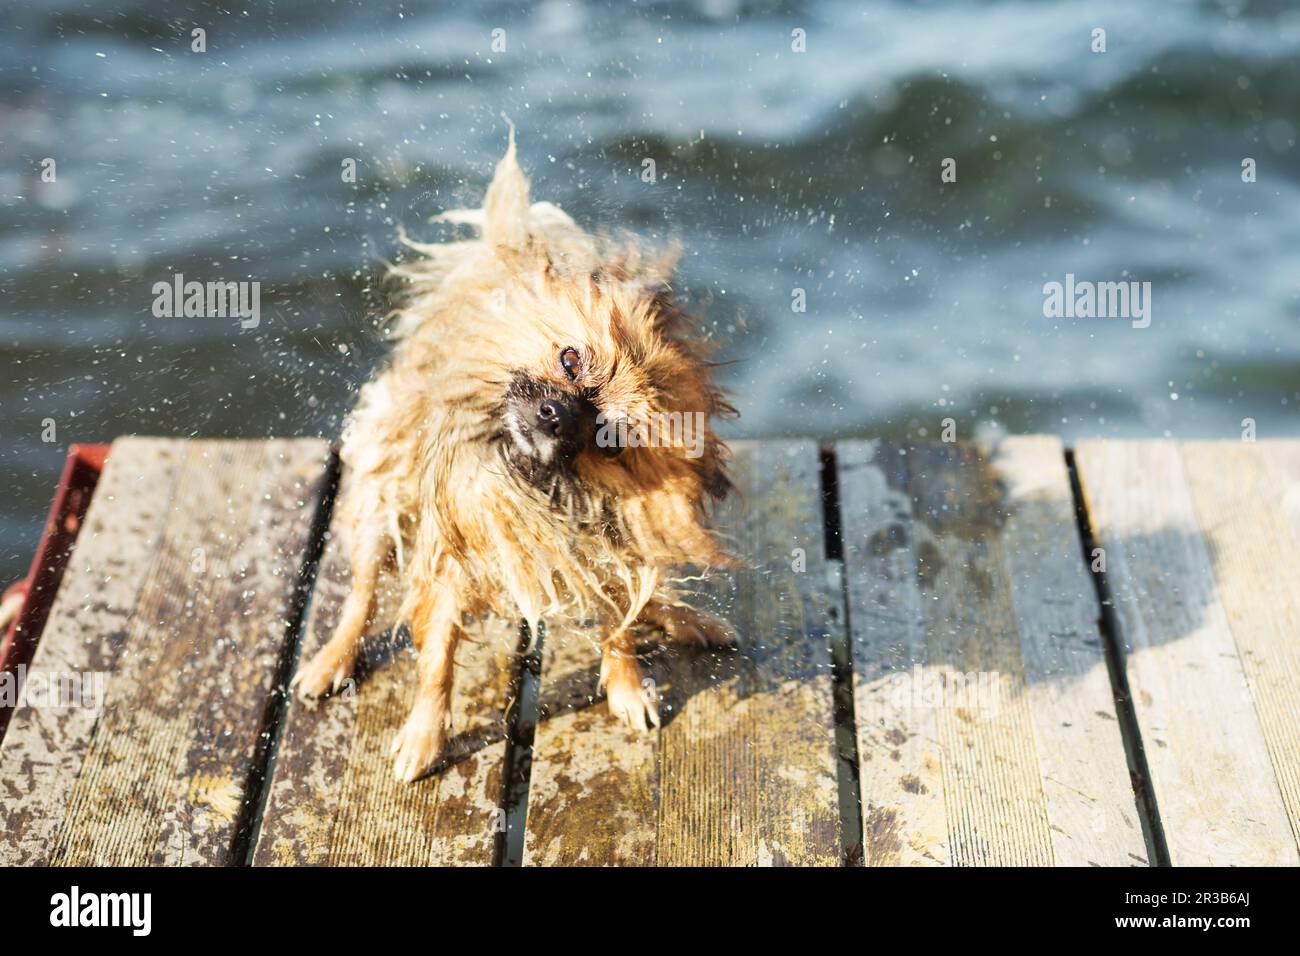 Pomeranian dog shaking off water. Pomeranian shakes water from his fur Stock Photo